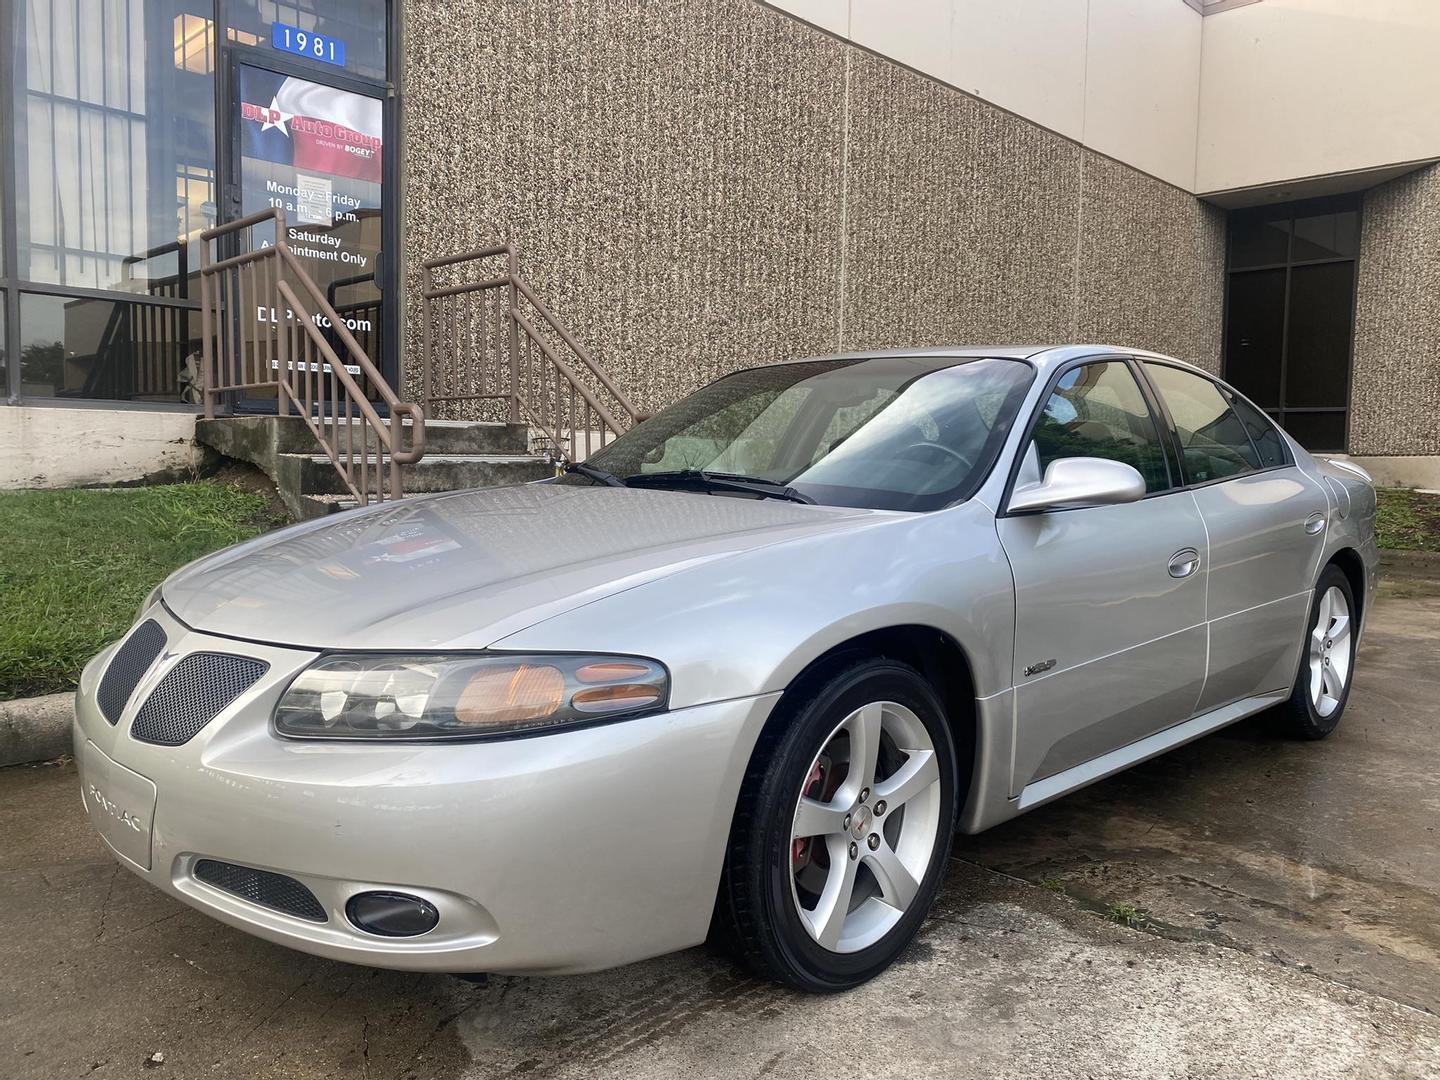 Used 2005 Pontiac Bonneville's nationwide for sale - MotorCloud